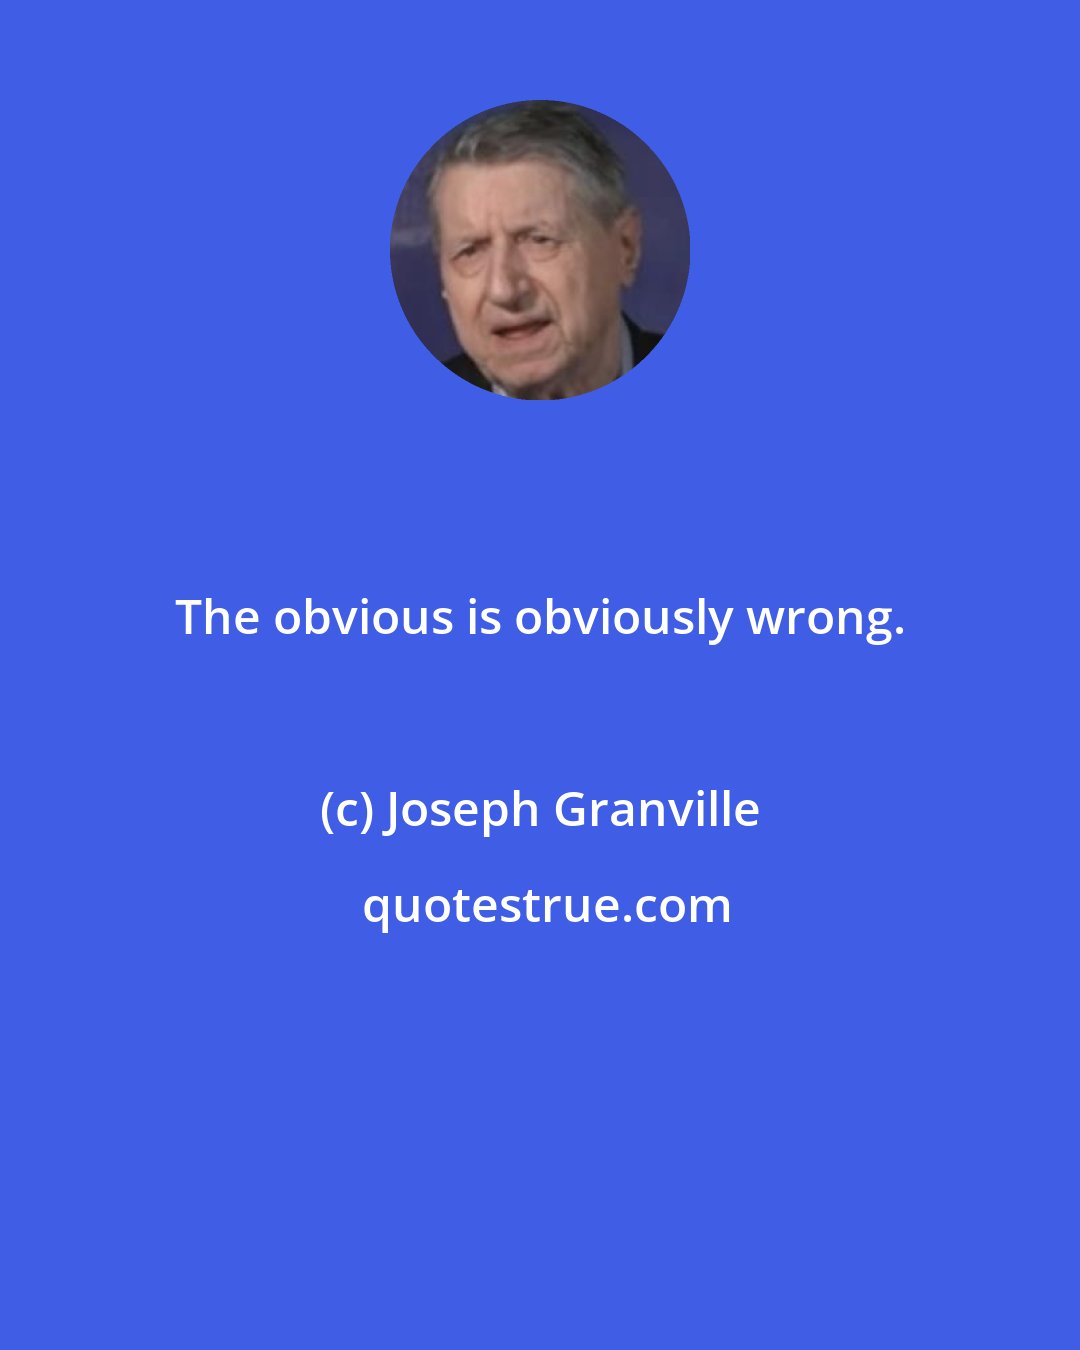 Joseph Granville: The obvious is obviously wrong.